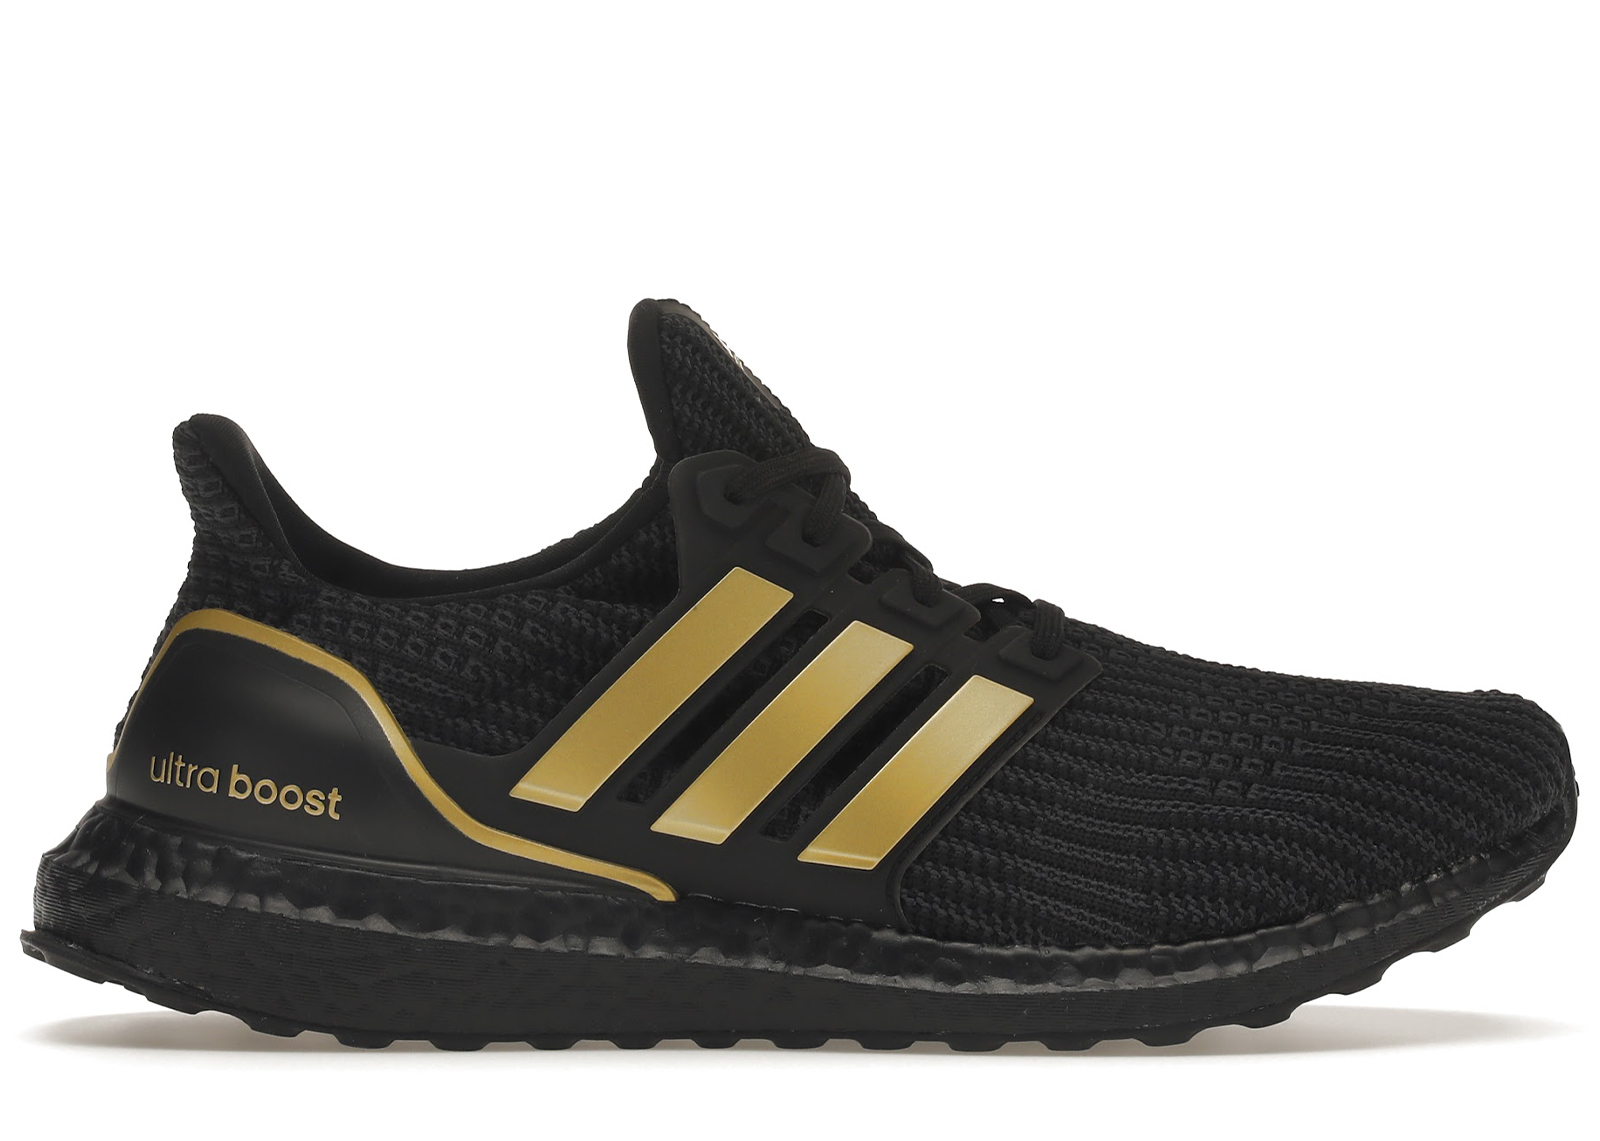 adidas Ultra Boost 4.0 DNA Black Matte Gold メンズ - GY8542 - JP